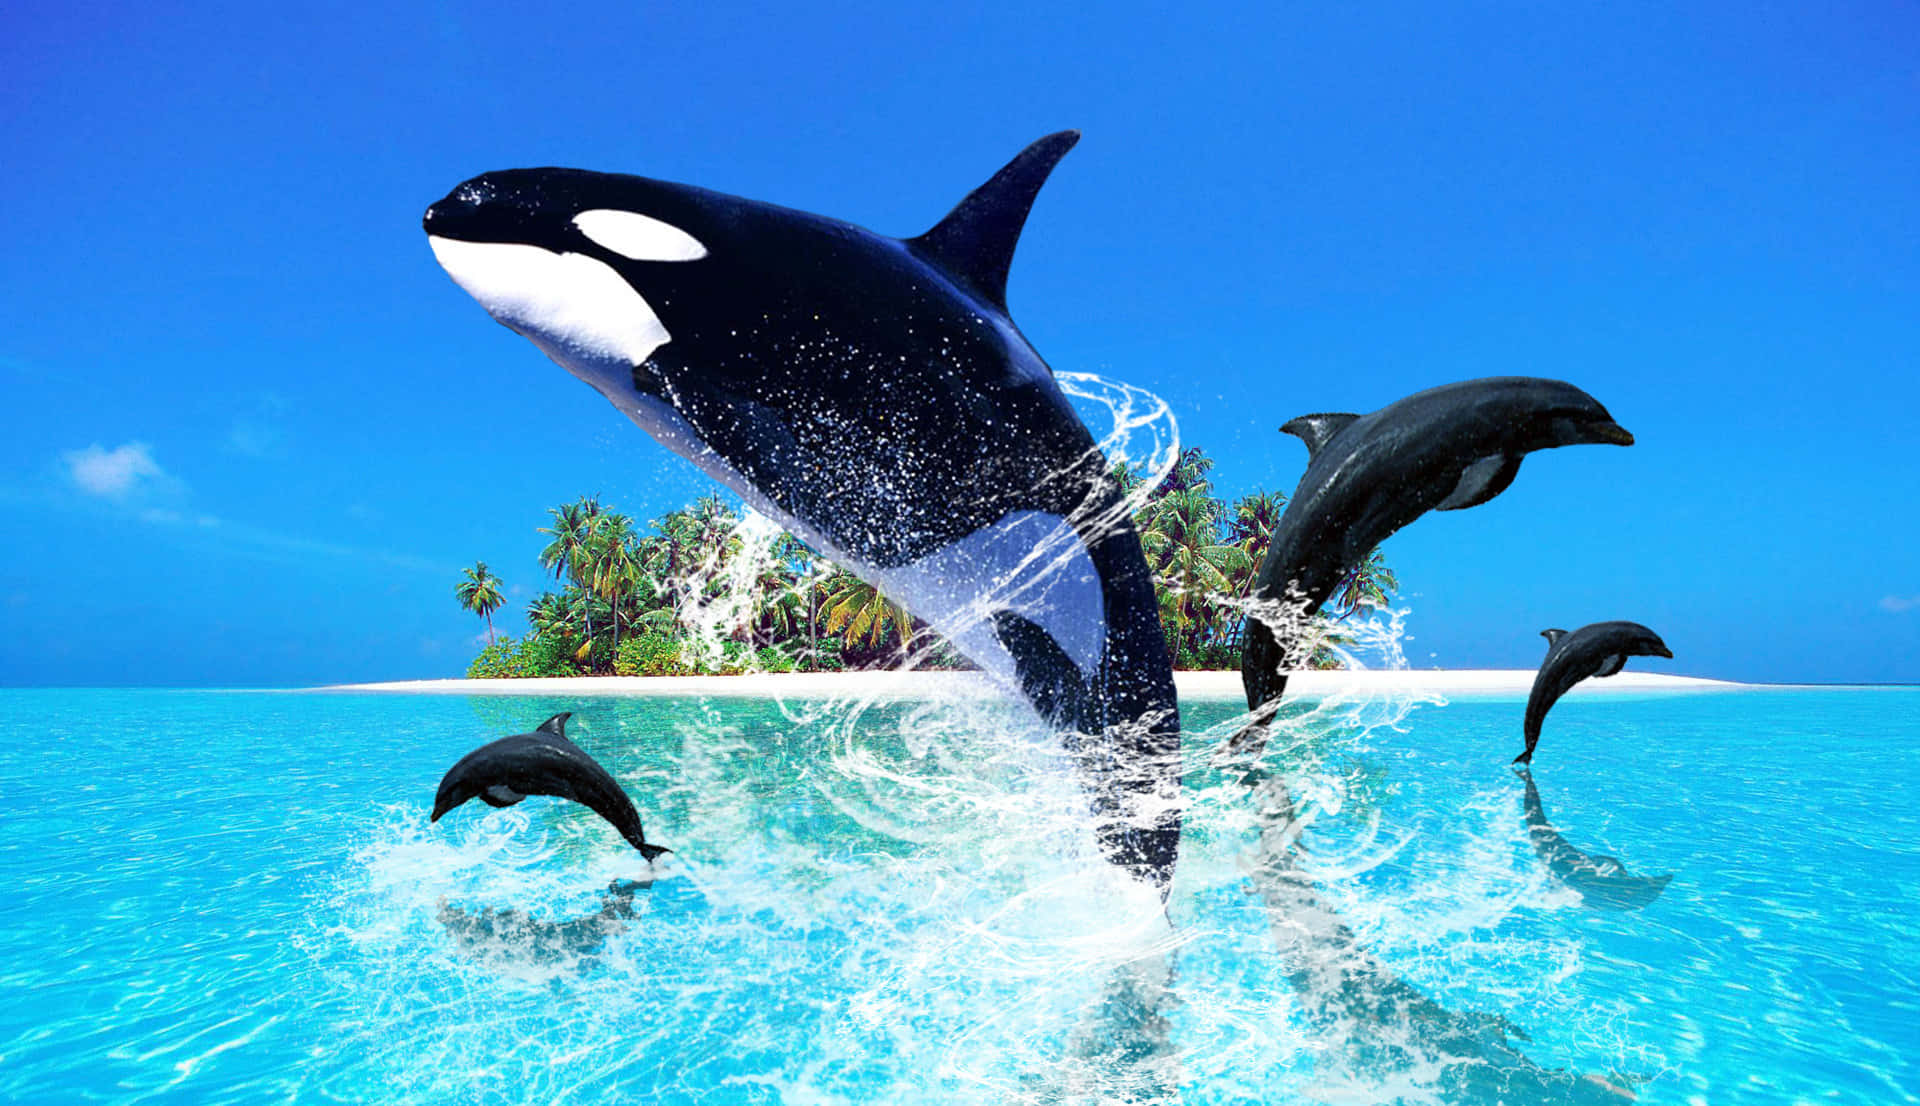 Orca Whales Jumping In The Ocean With Dolphins Wallpaper